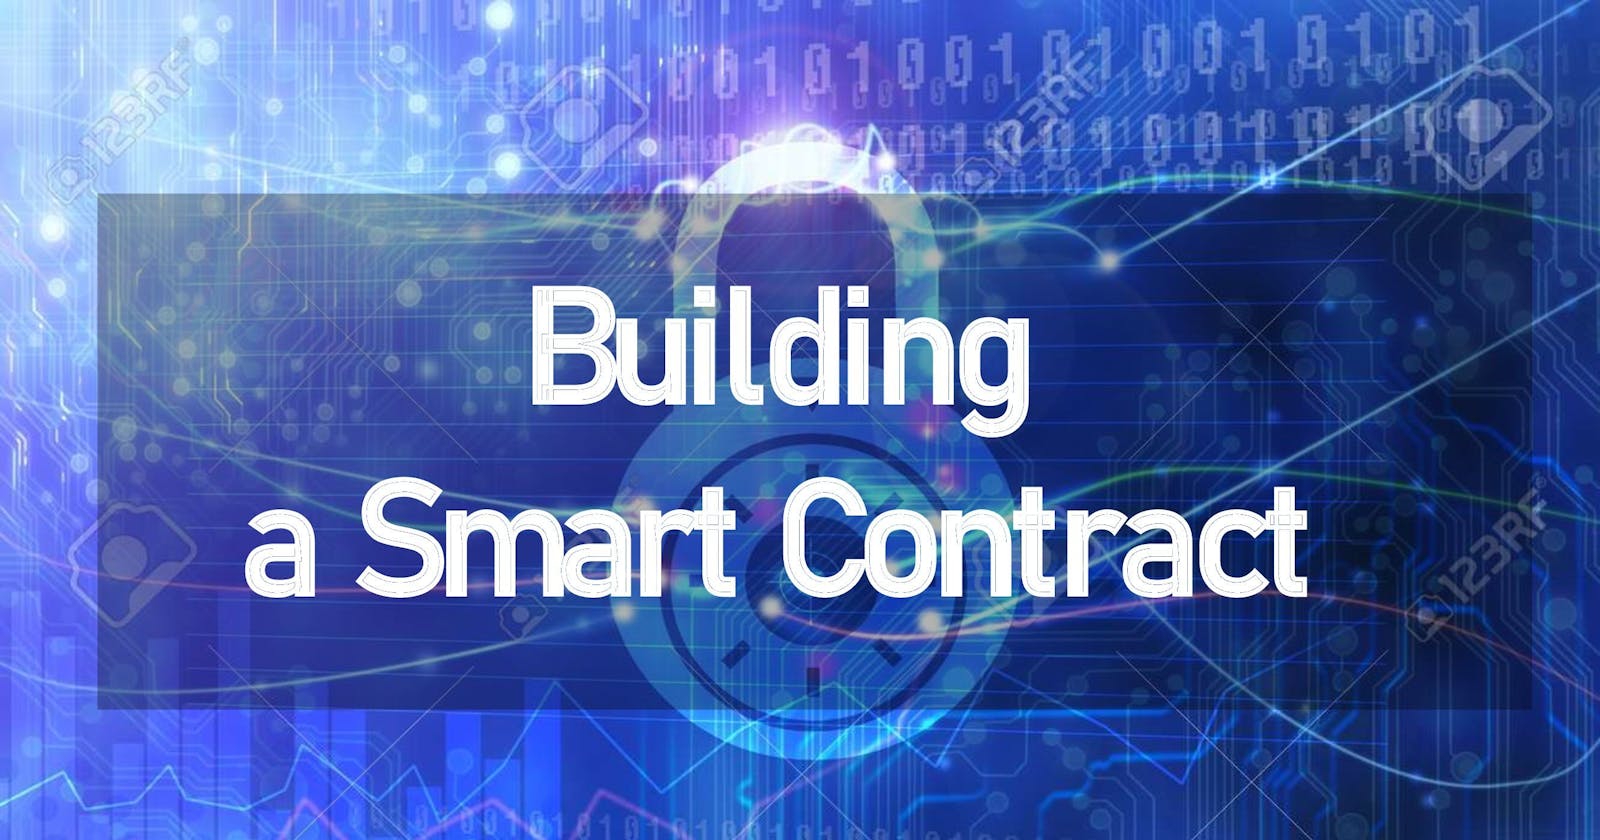 Building a Smart Contract